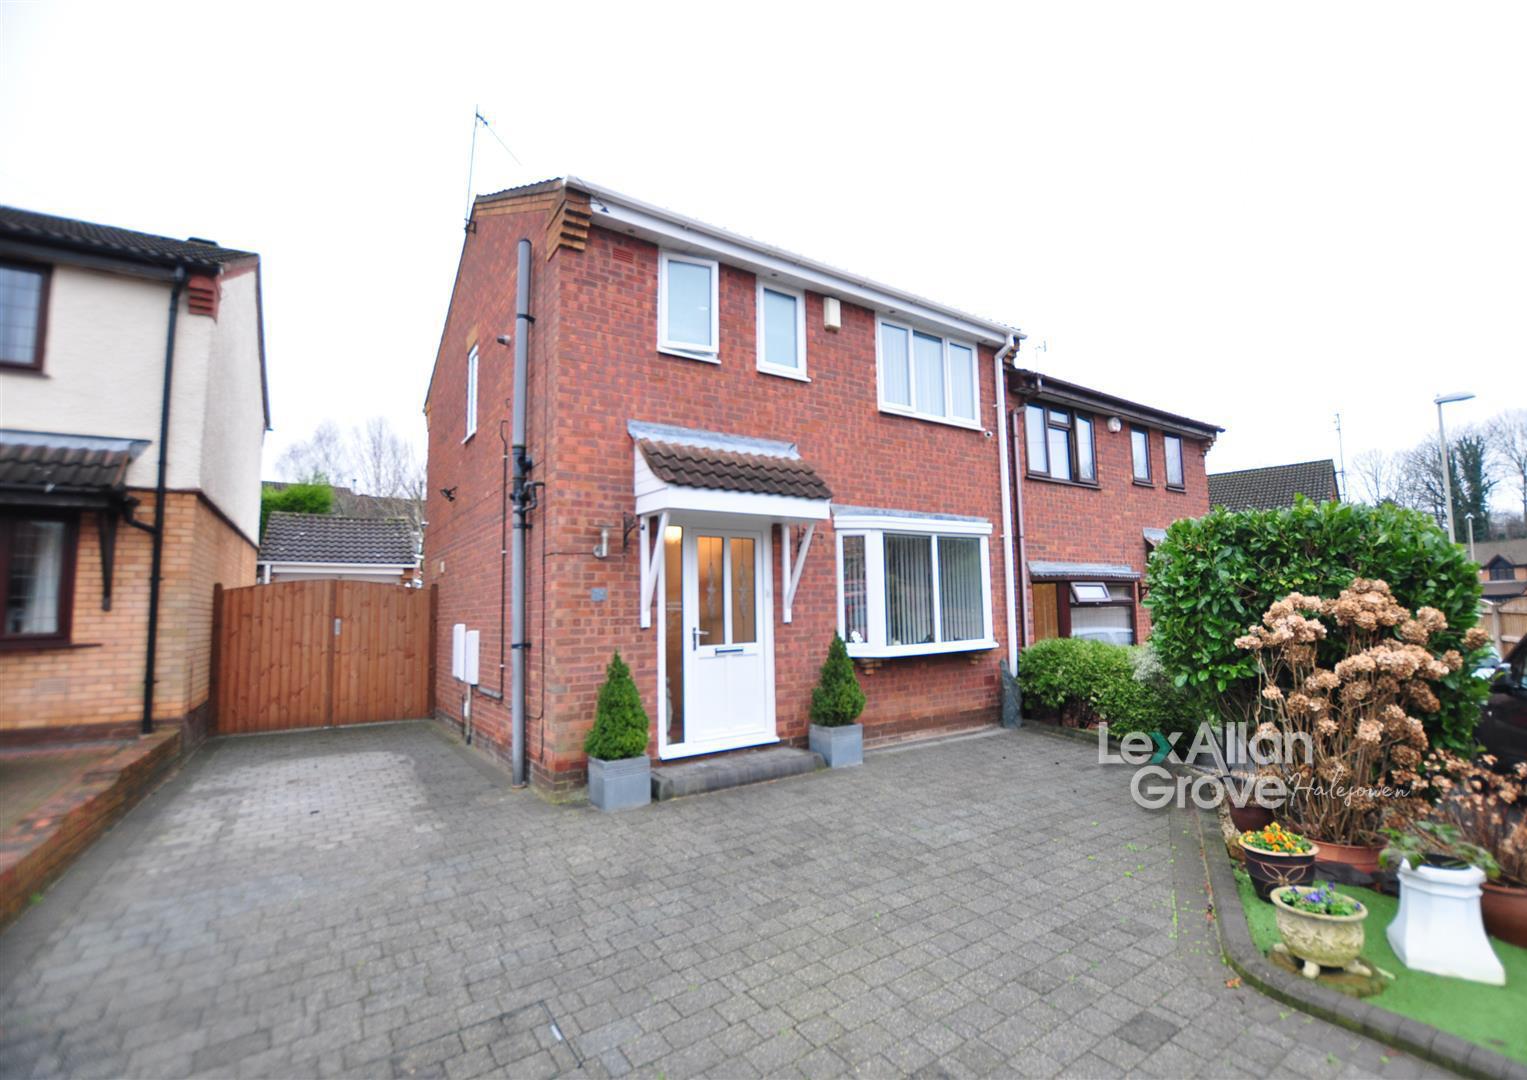 3 bed  for sale in Balmoral Close, Halesowen, B62 